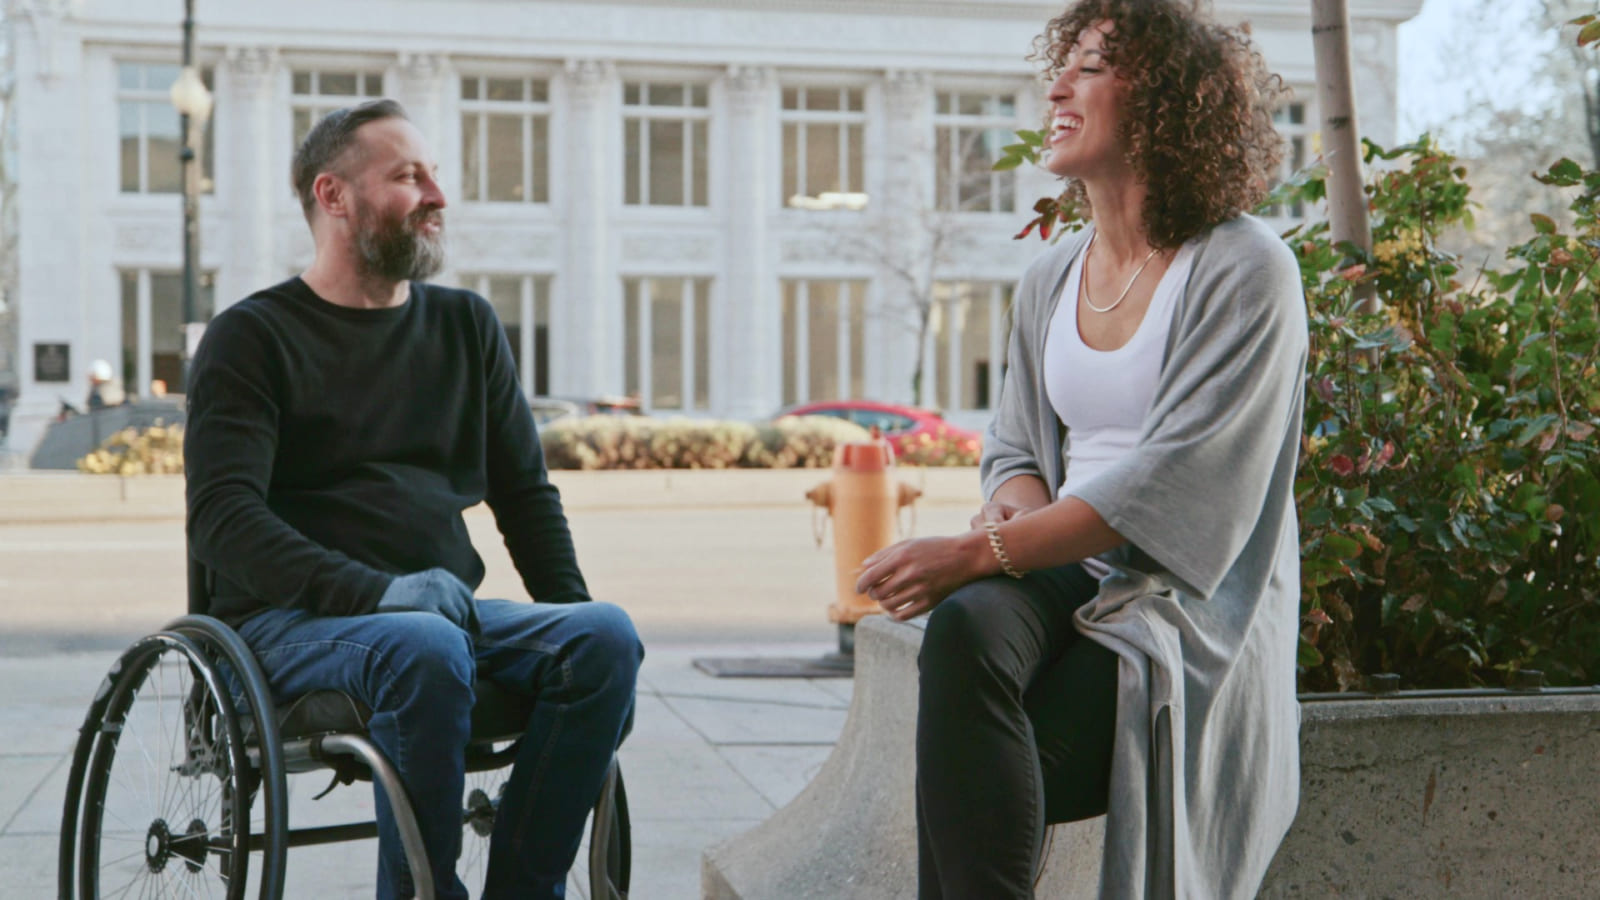 'A man in a wheelchair and a woman are smiling and talking are smiling and talking.'